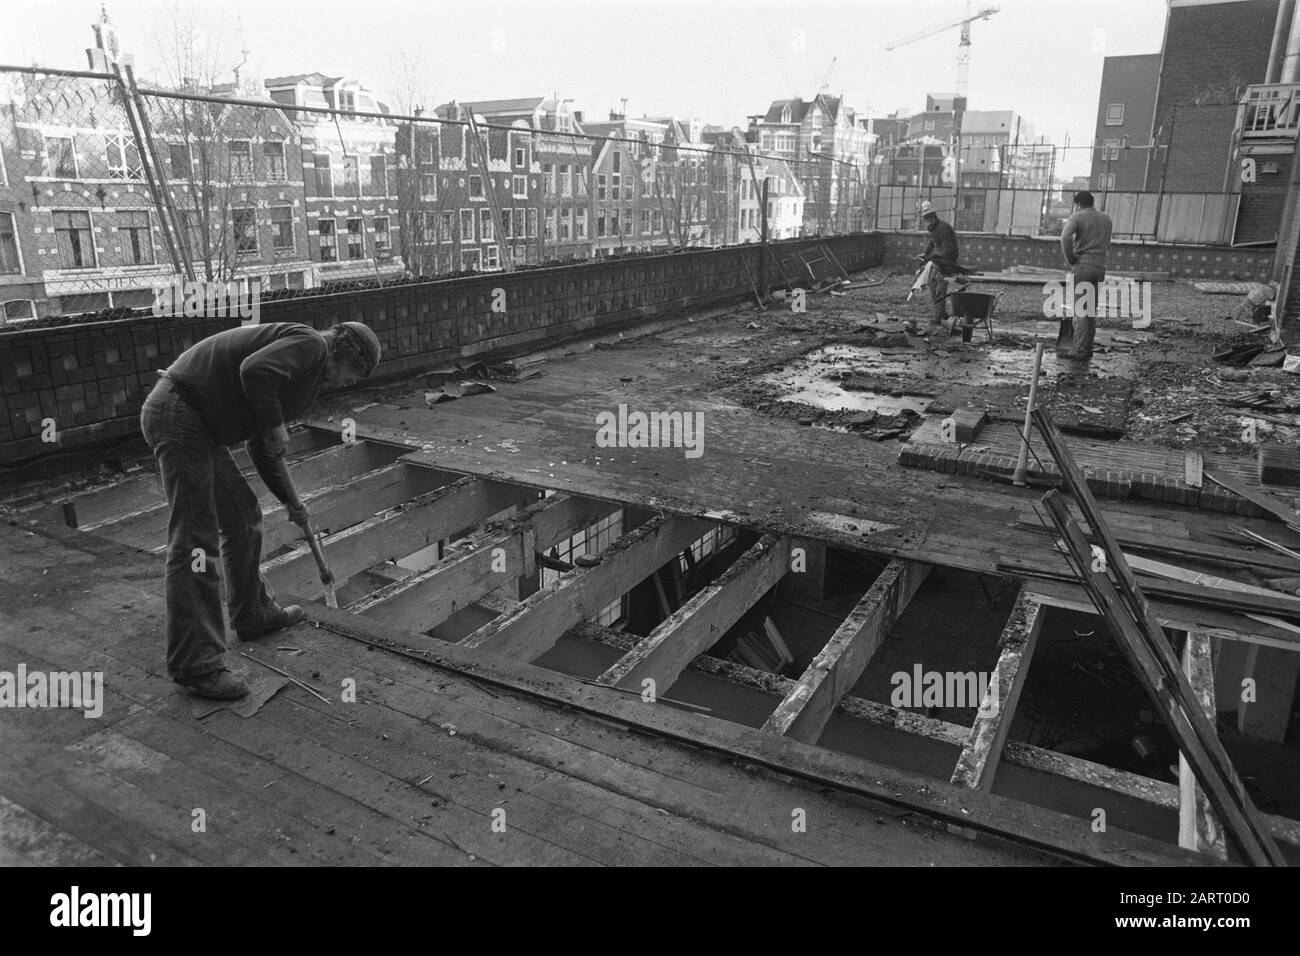 Demolition Grote Wetering started, demolition roof at the rear of the building Date: December 3, 1980 Location: Amsterdam, Noord-Holland Keywords: demolition, buildings Stock Photo